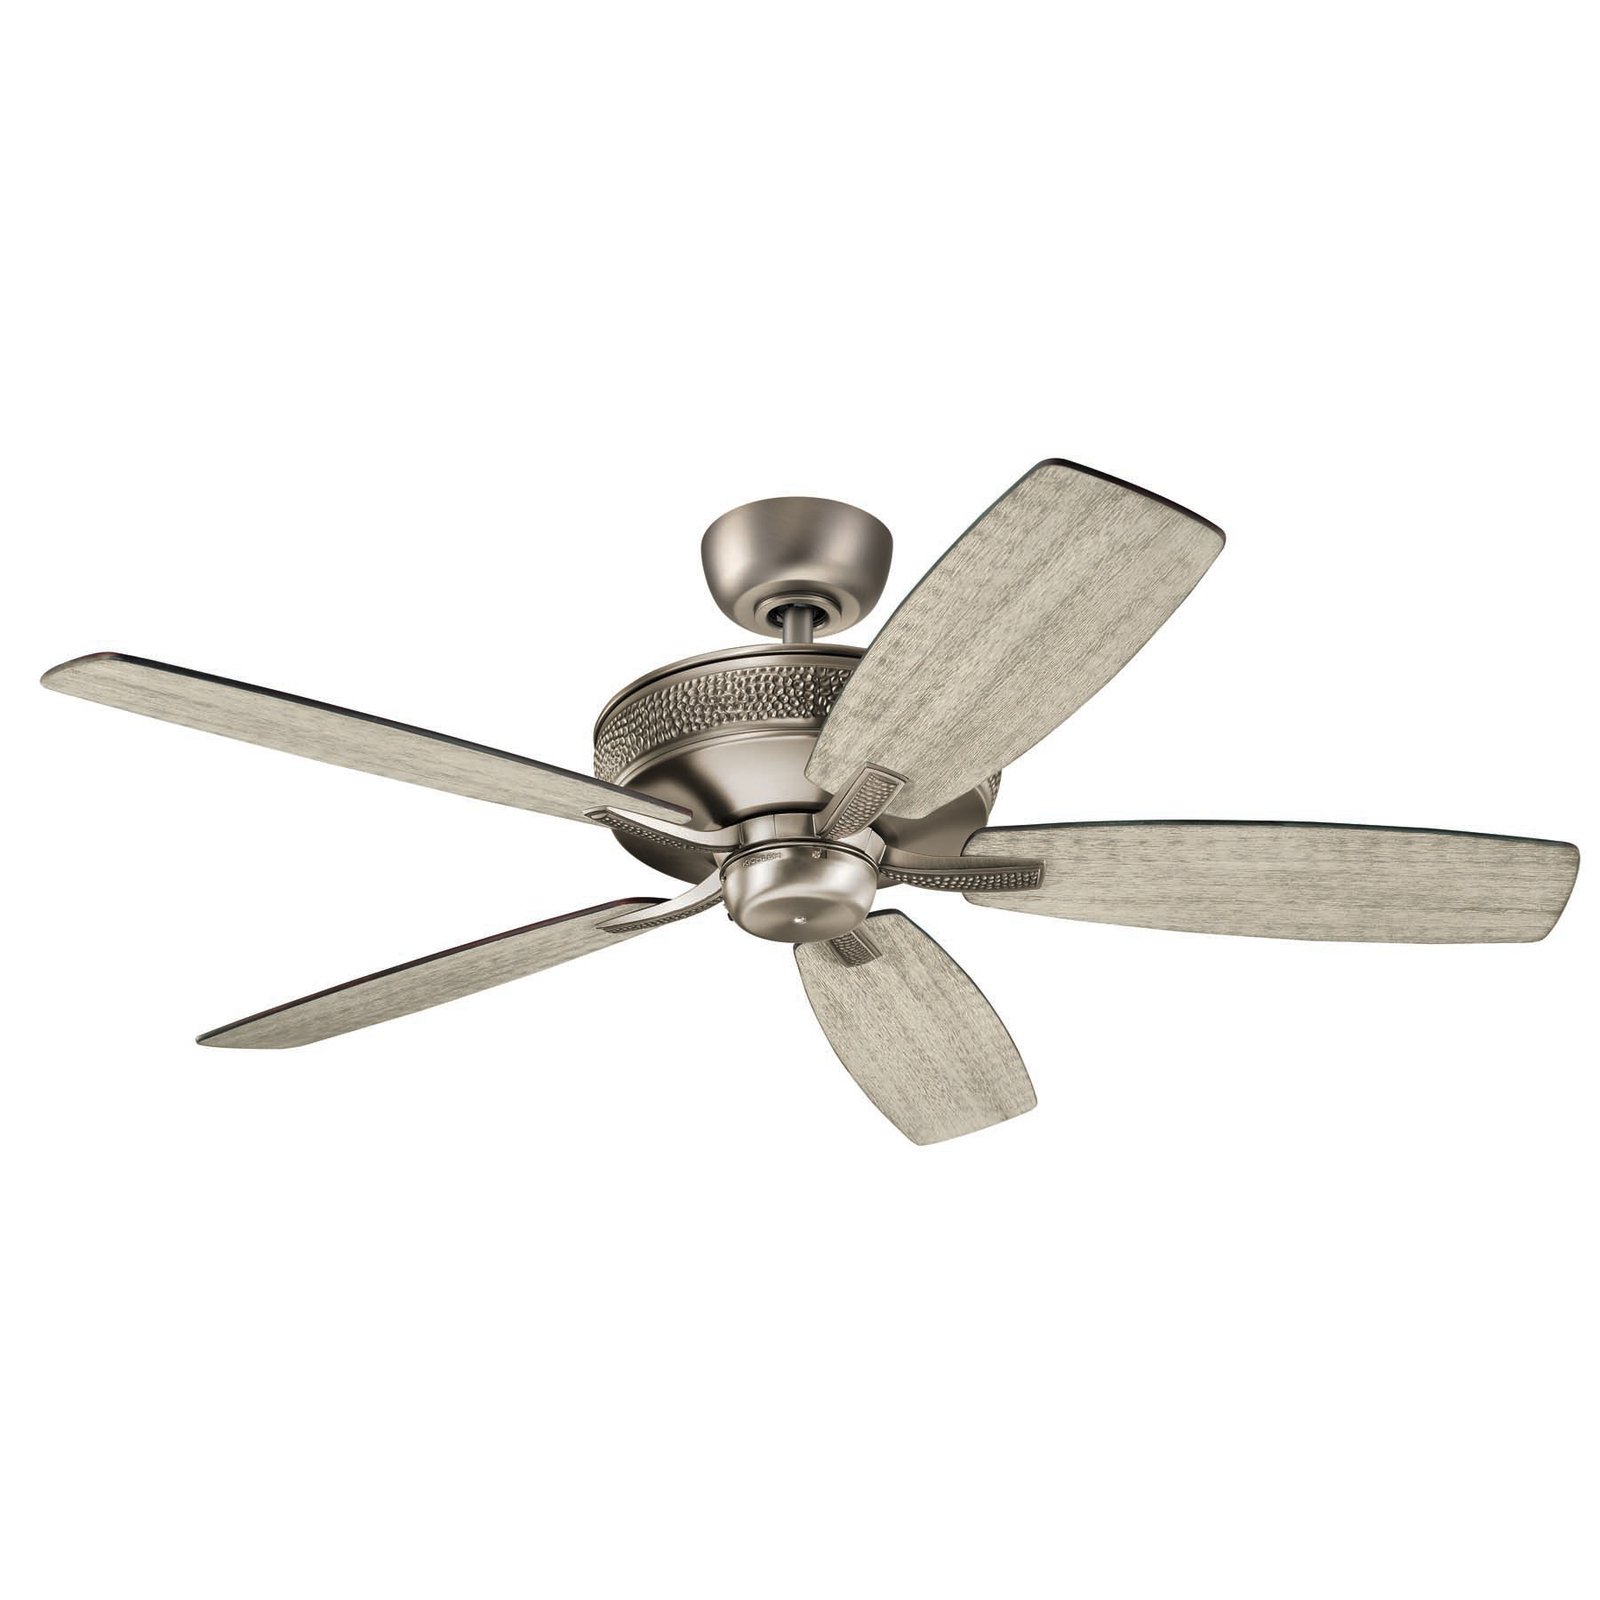 Monarch2 52 ceiling fan, antique pewter brushed